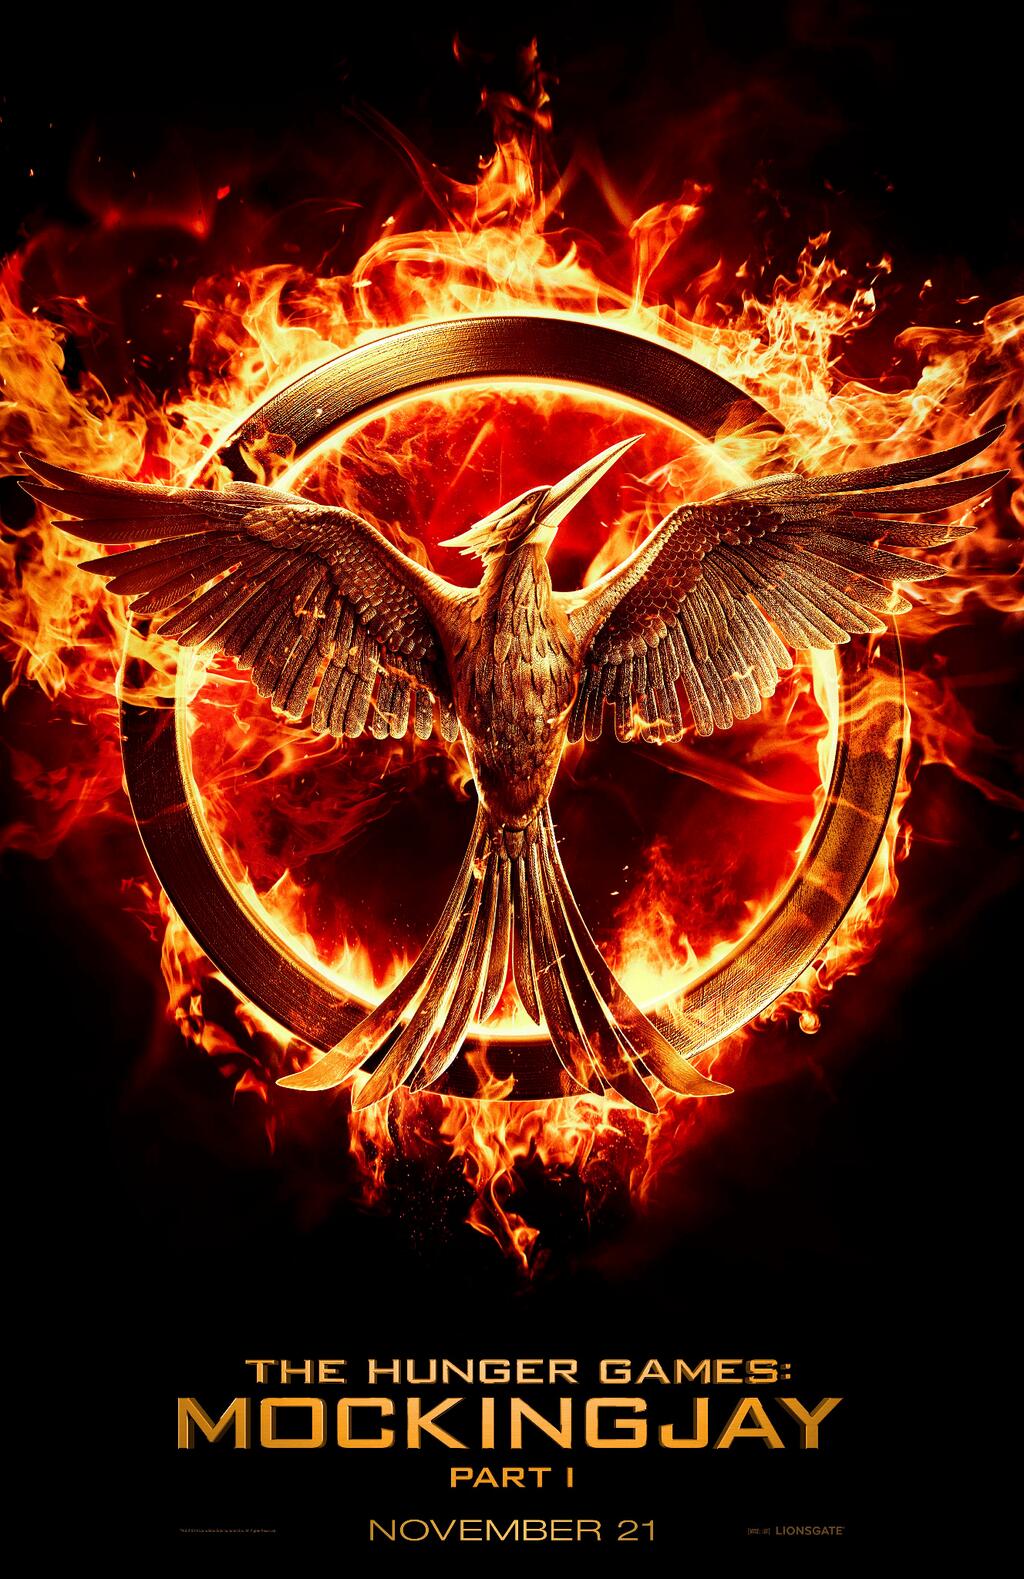 The Hunger Games - Mockingjay Part 01